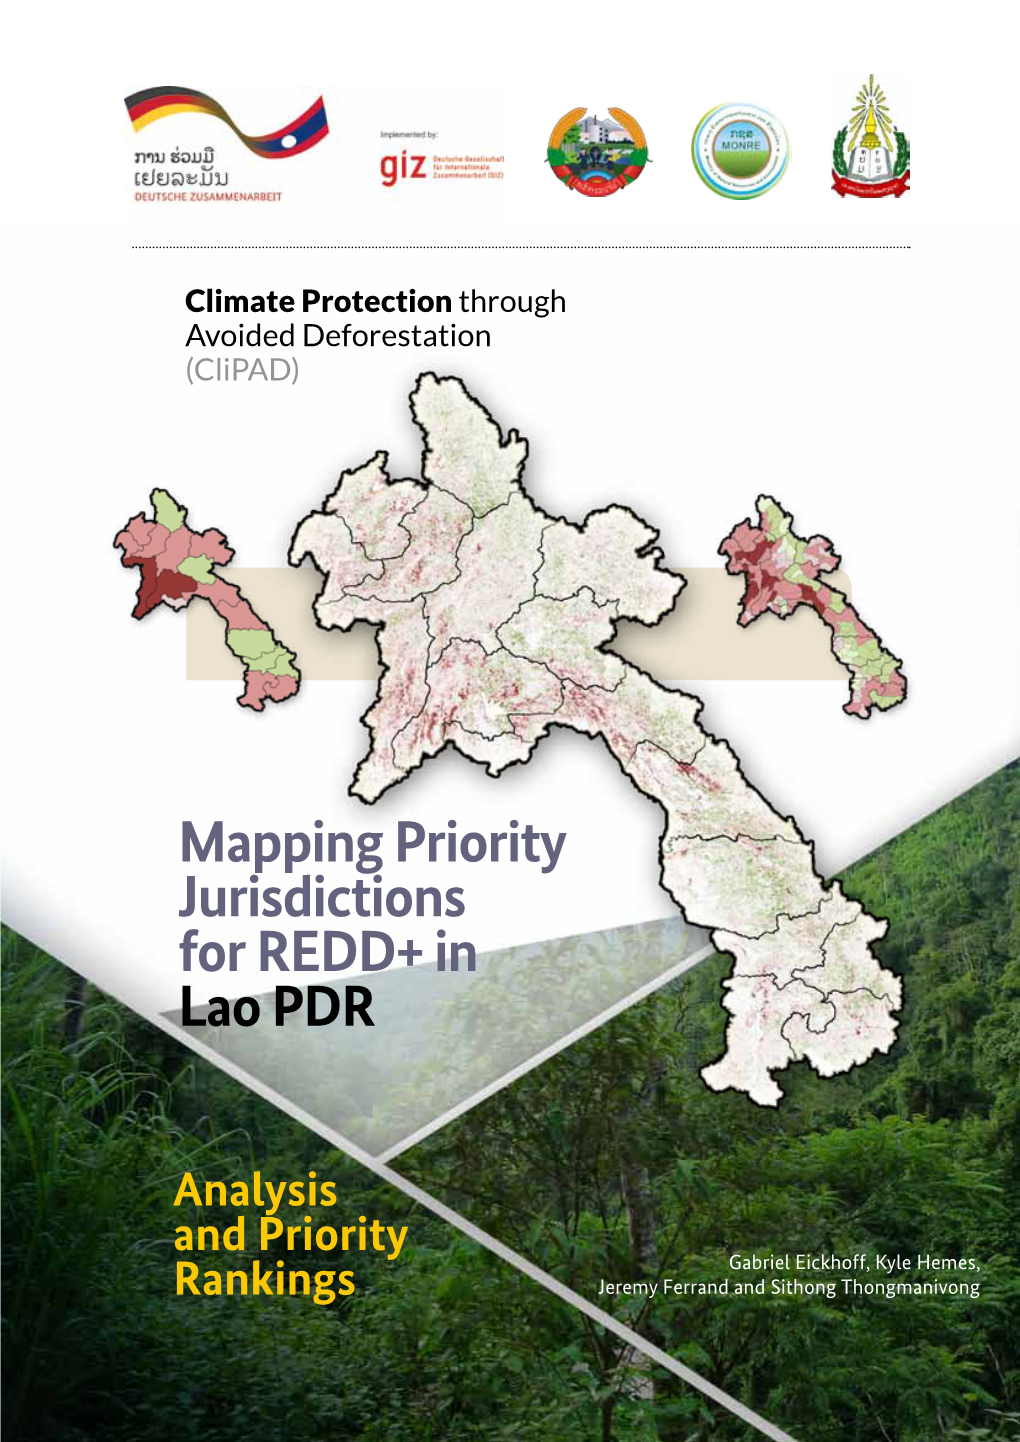 Mapping Priority Jurisdictions for REDD+ in Lao PDR